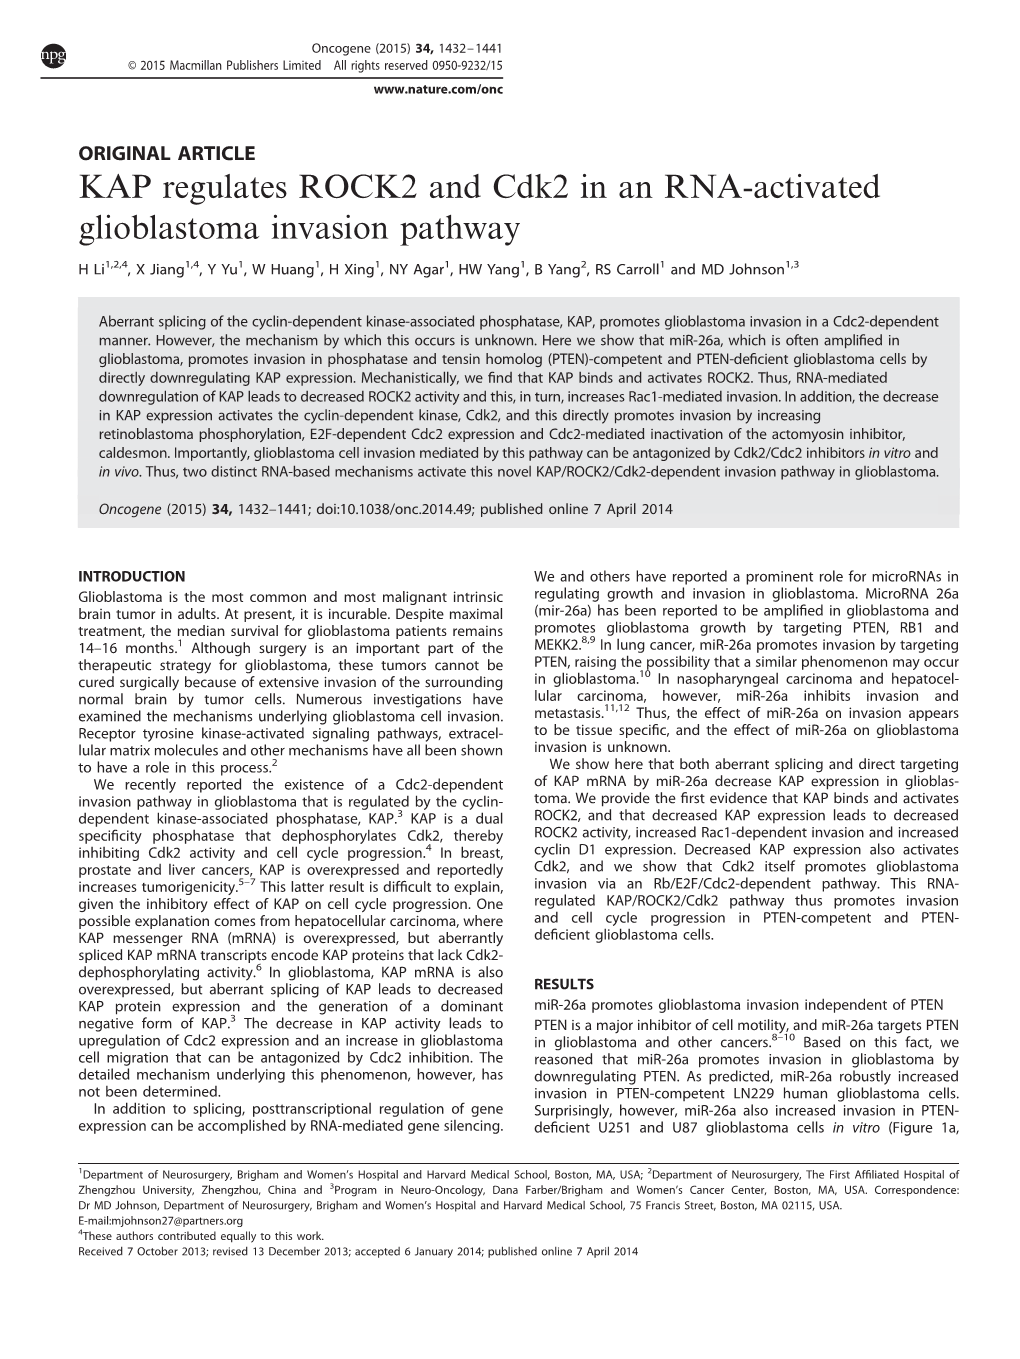 KAP Regulates ROCK2 and Cdk2 in an RNA-Activated Glioblastoma Invasion Pathway